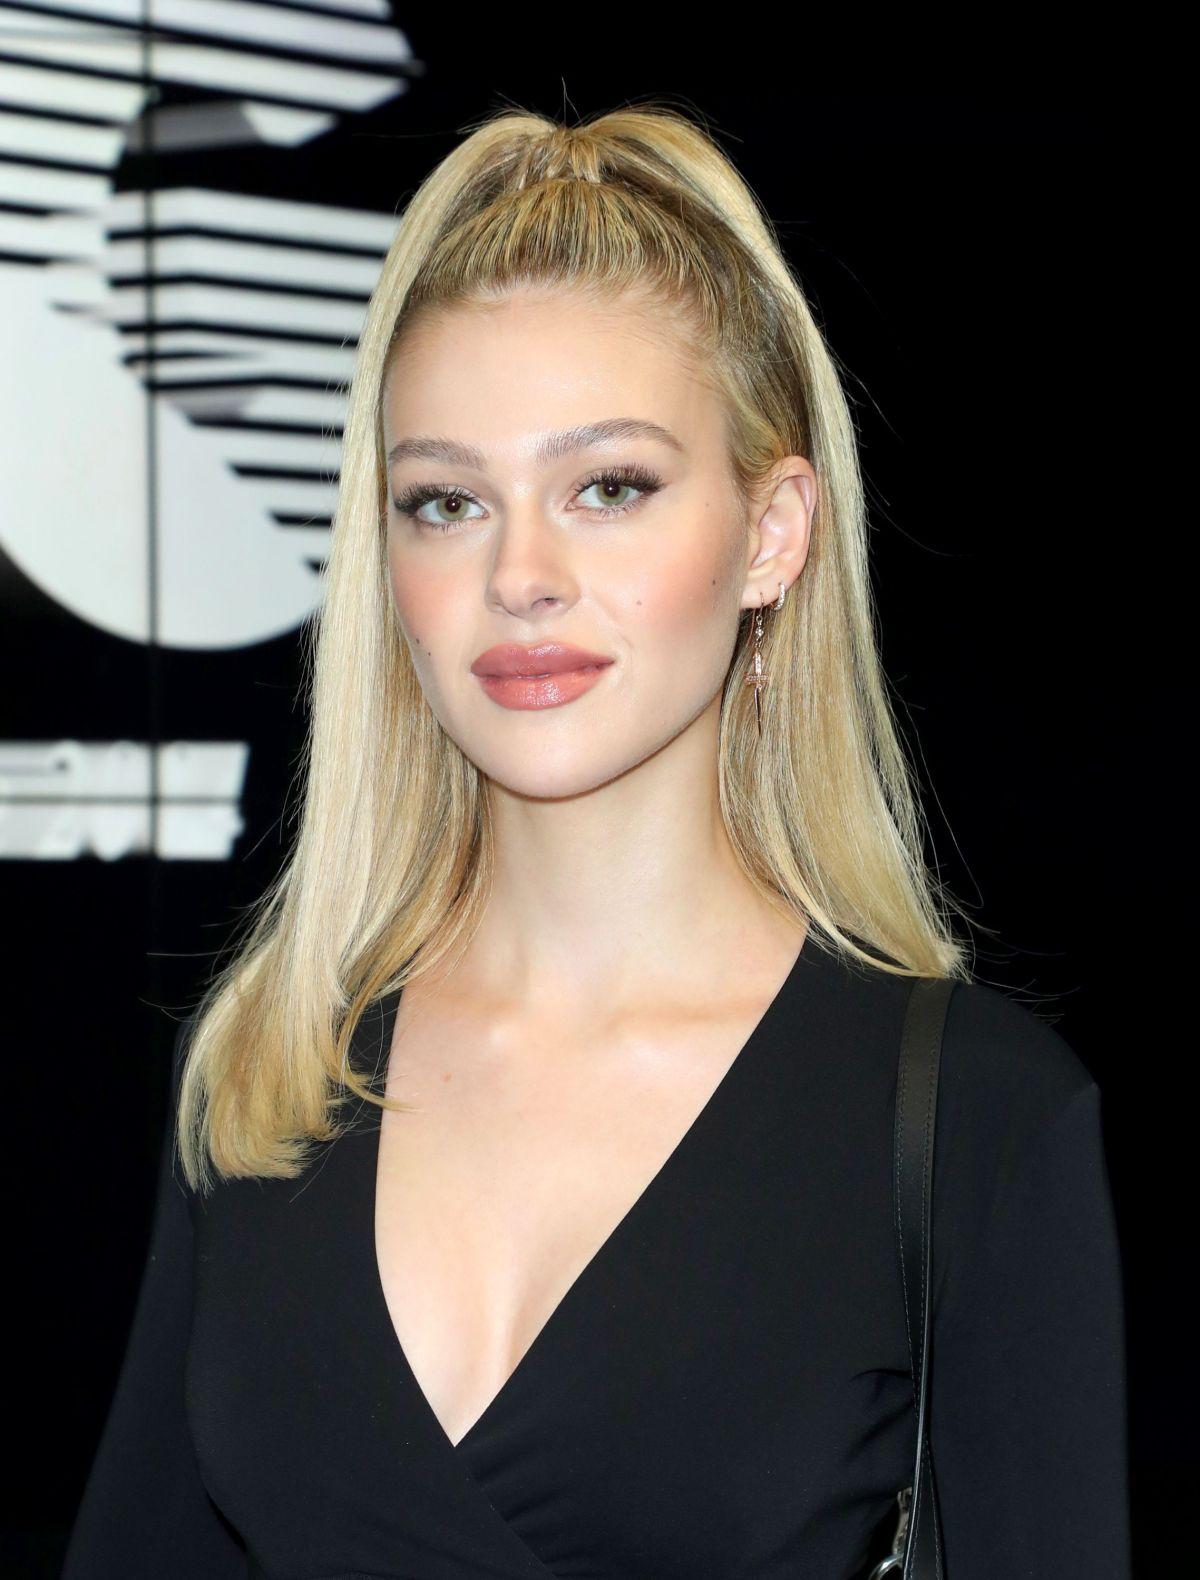 55 Hot Pictures Of Nicola Peltz Will Drive You Insane For Her 121